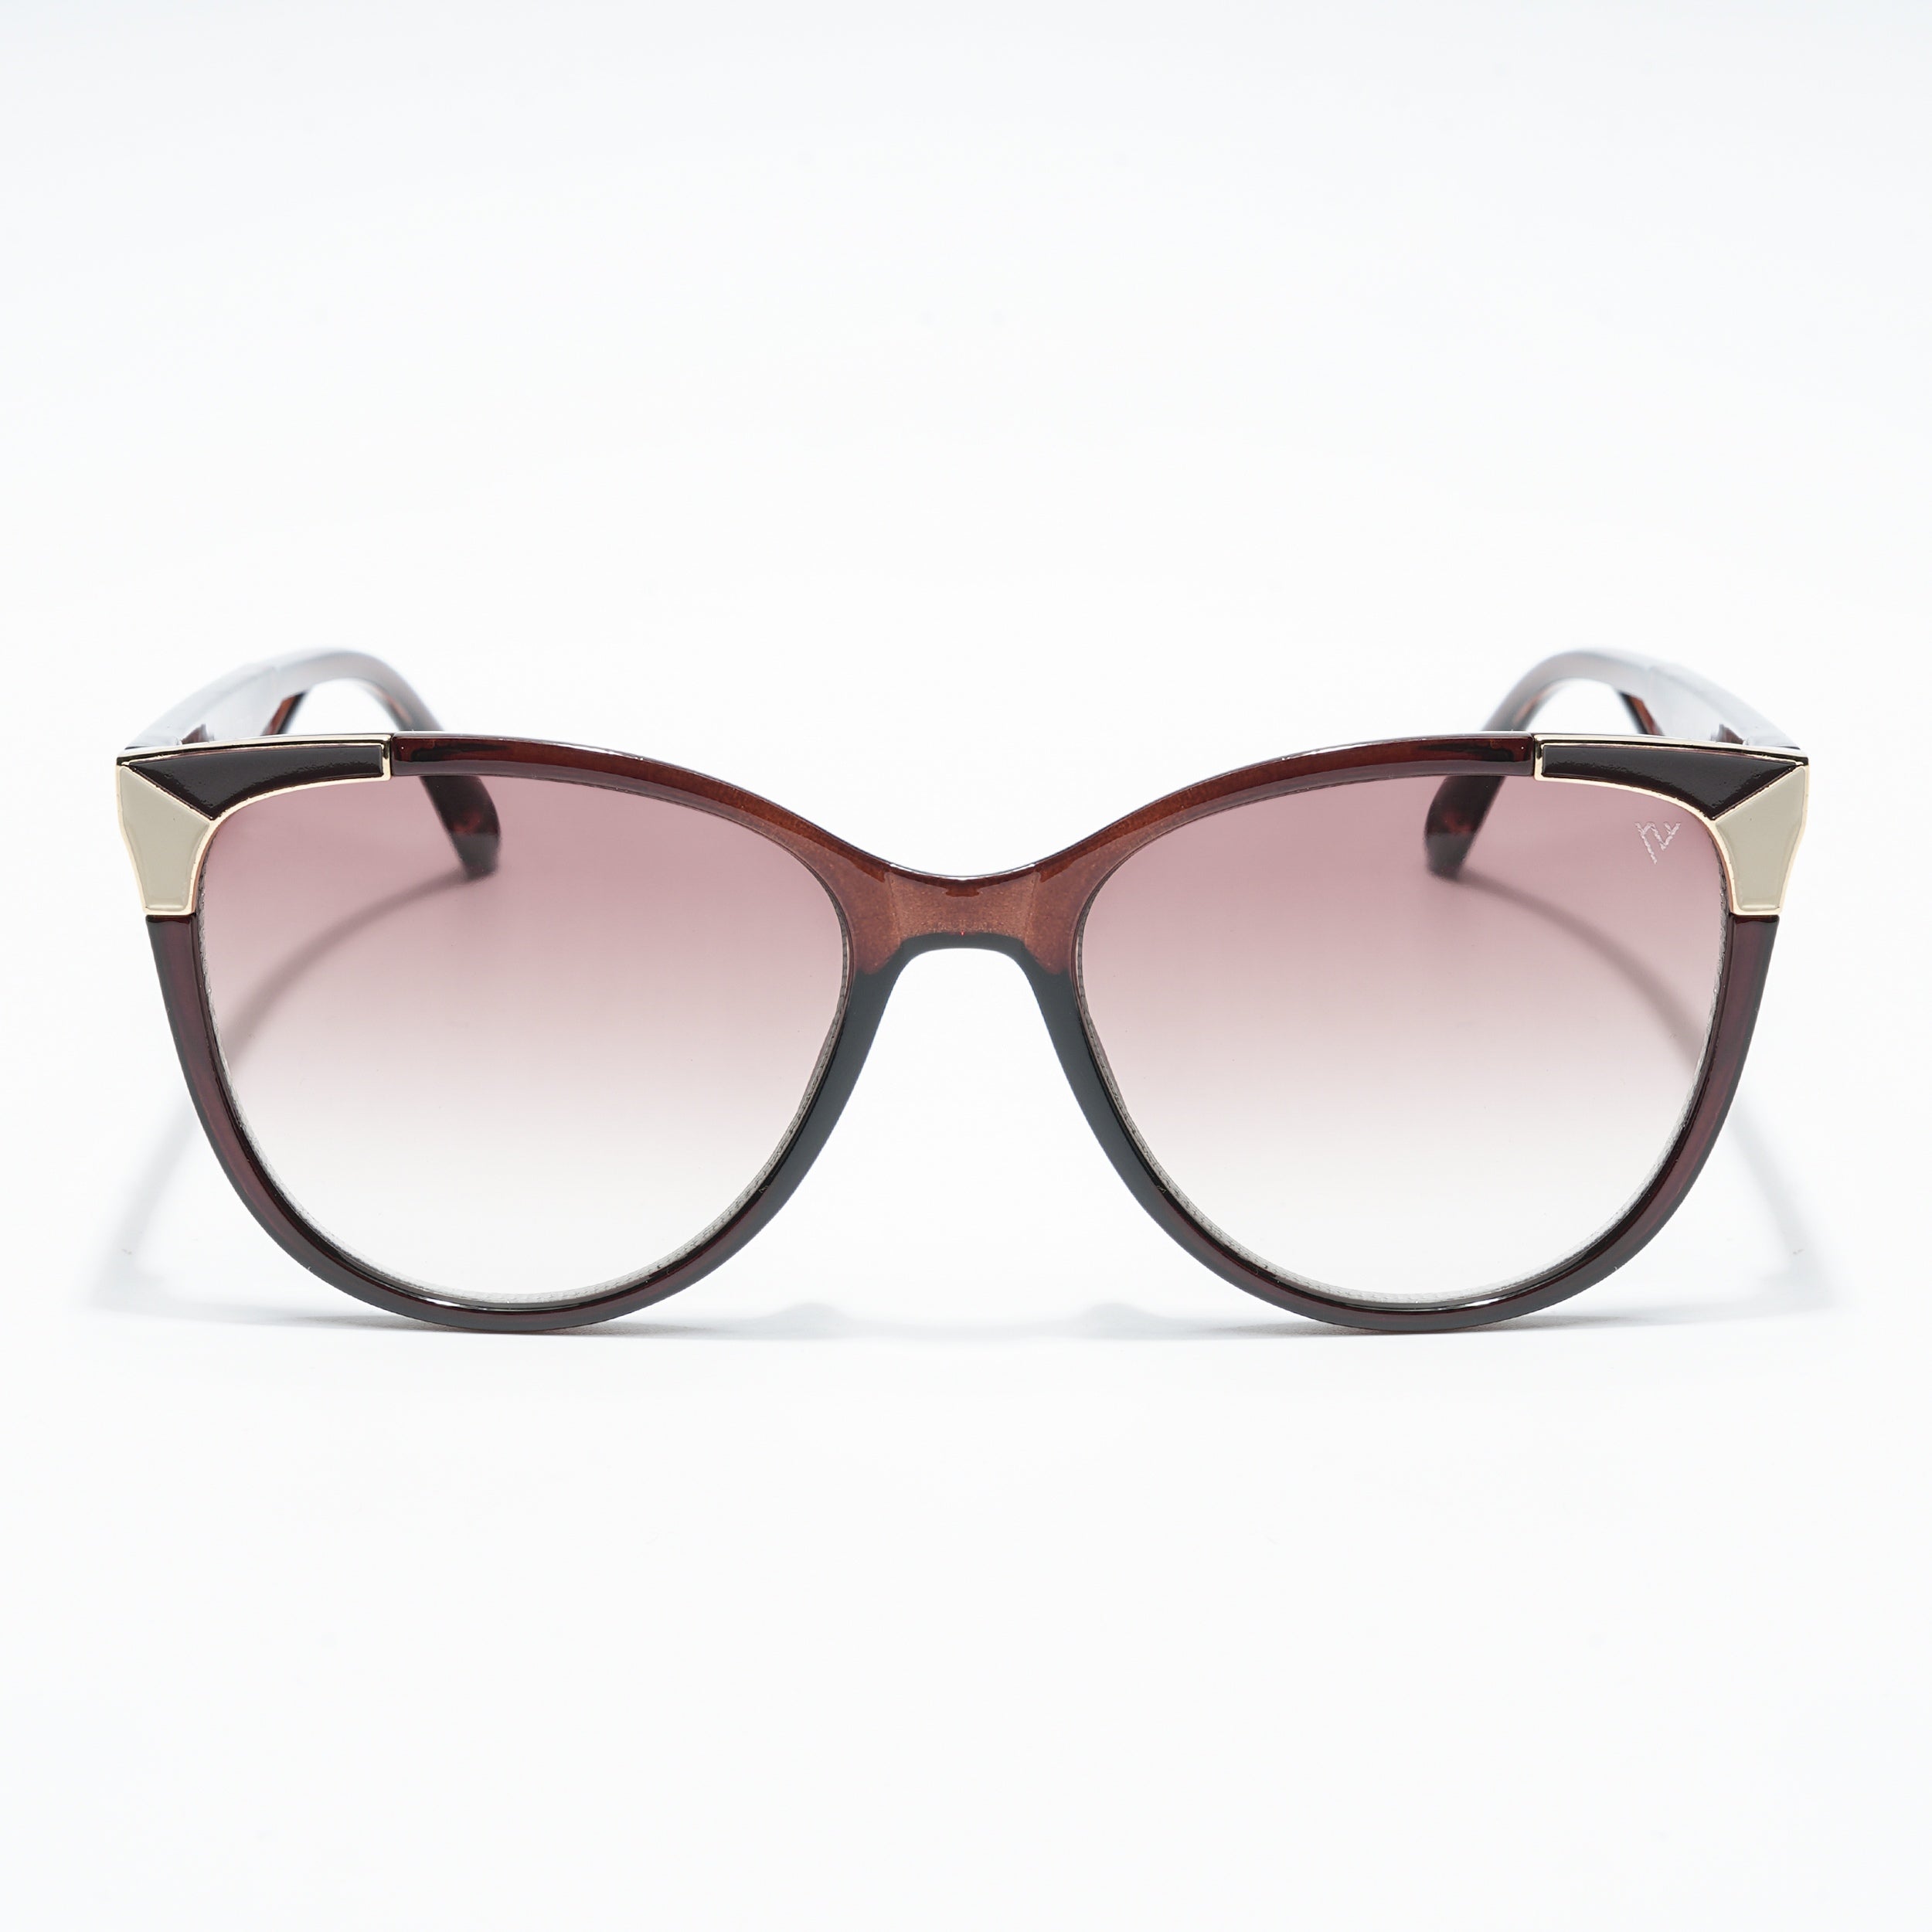 Voyage Brown Cateye Sunglasses for Women - MG4229